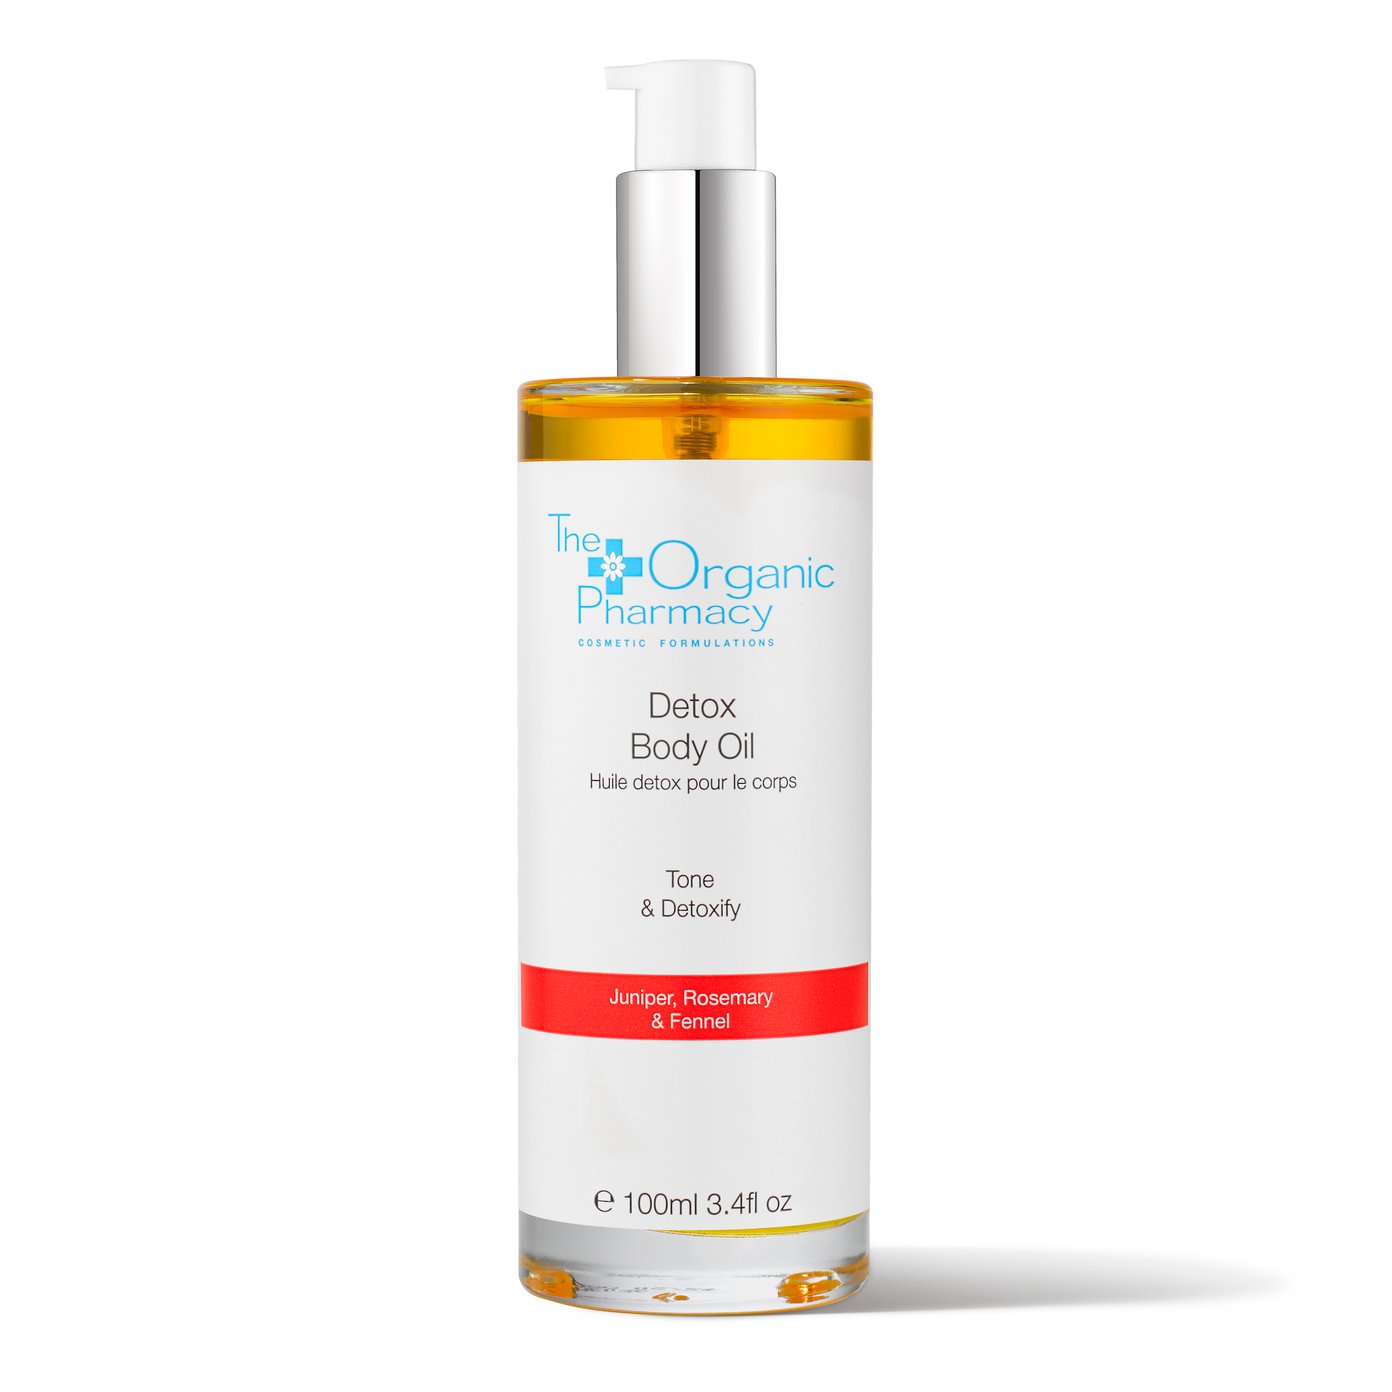 Treat yourself to luxury with our Body Juice Oil, makes your skin smoo, body  juice oil